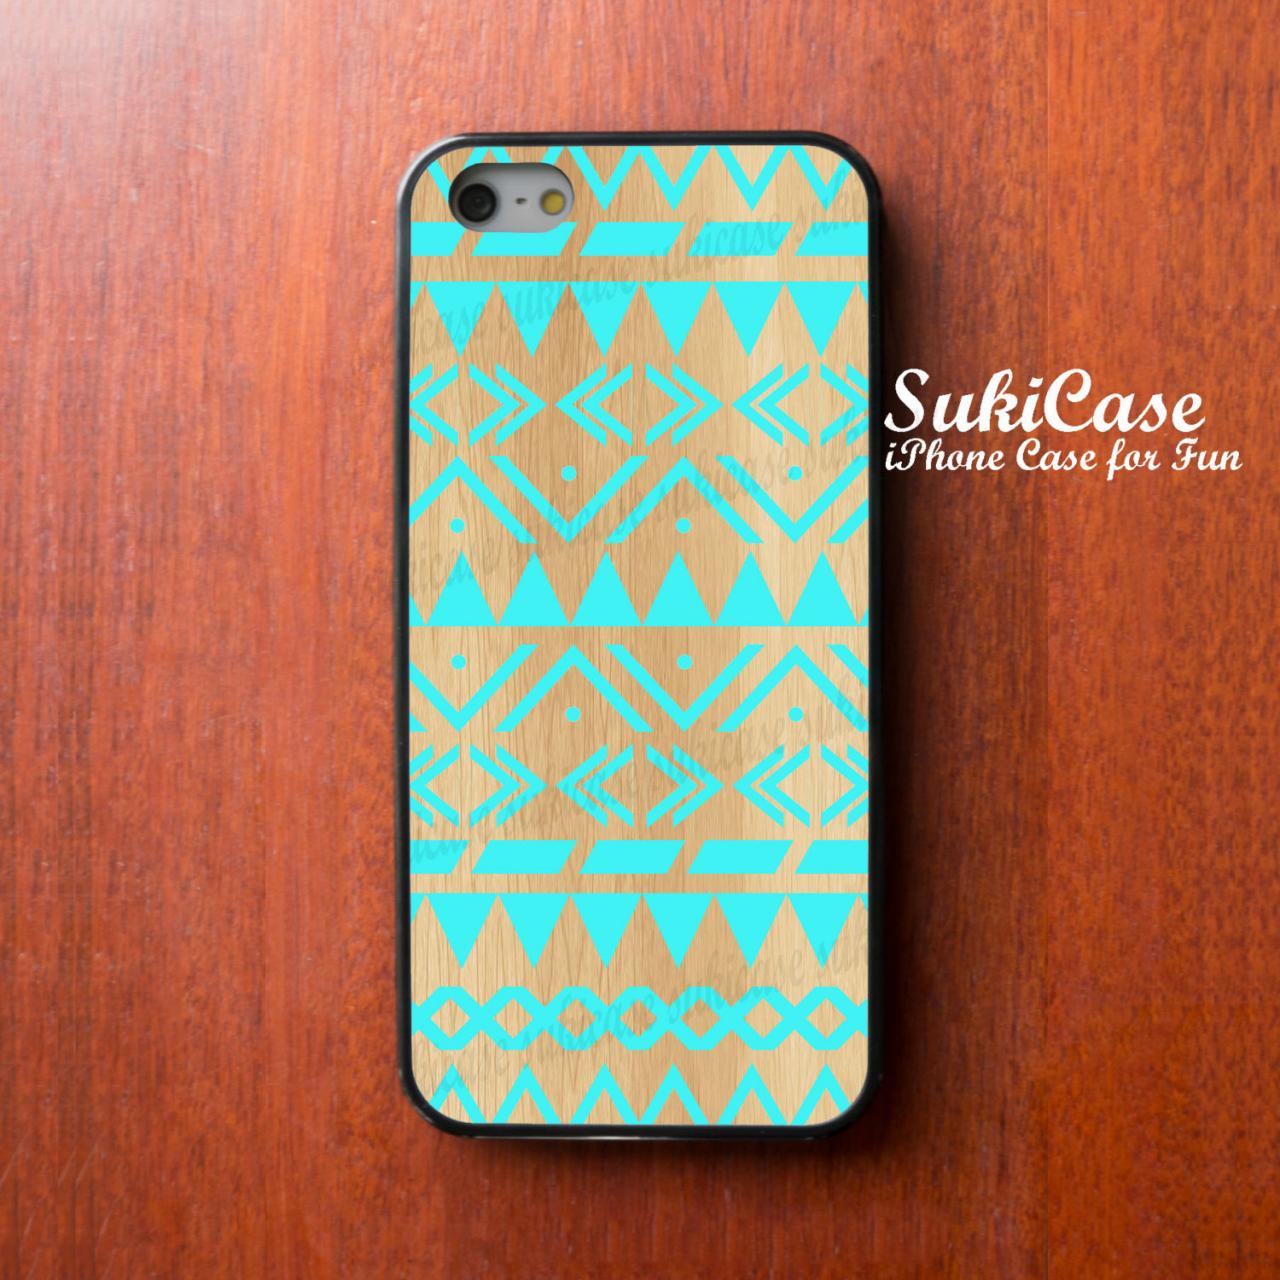 Iphone 5 Cases Geometric Mint And Aztec Light Wood Iphone 5 Iphone 5s Iphone Case Samsung Galaxy S4 S3 Cover Iphone 5c Cases Iphone 4s Case